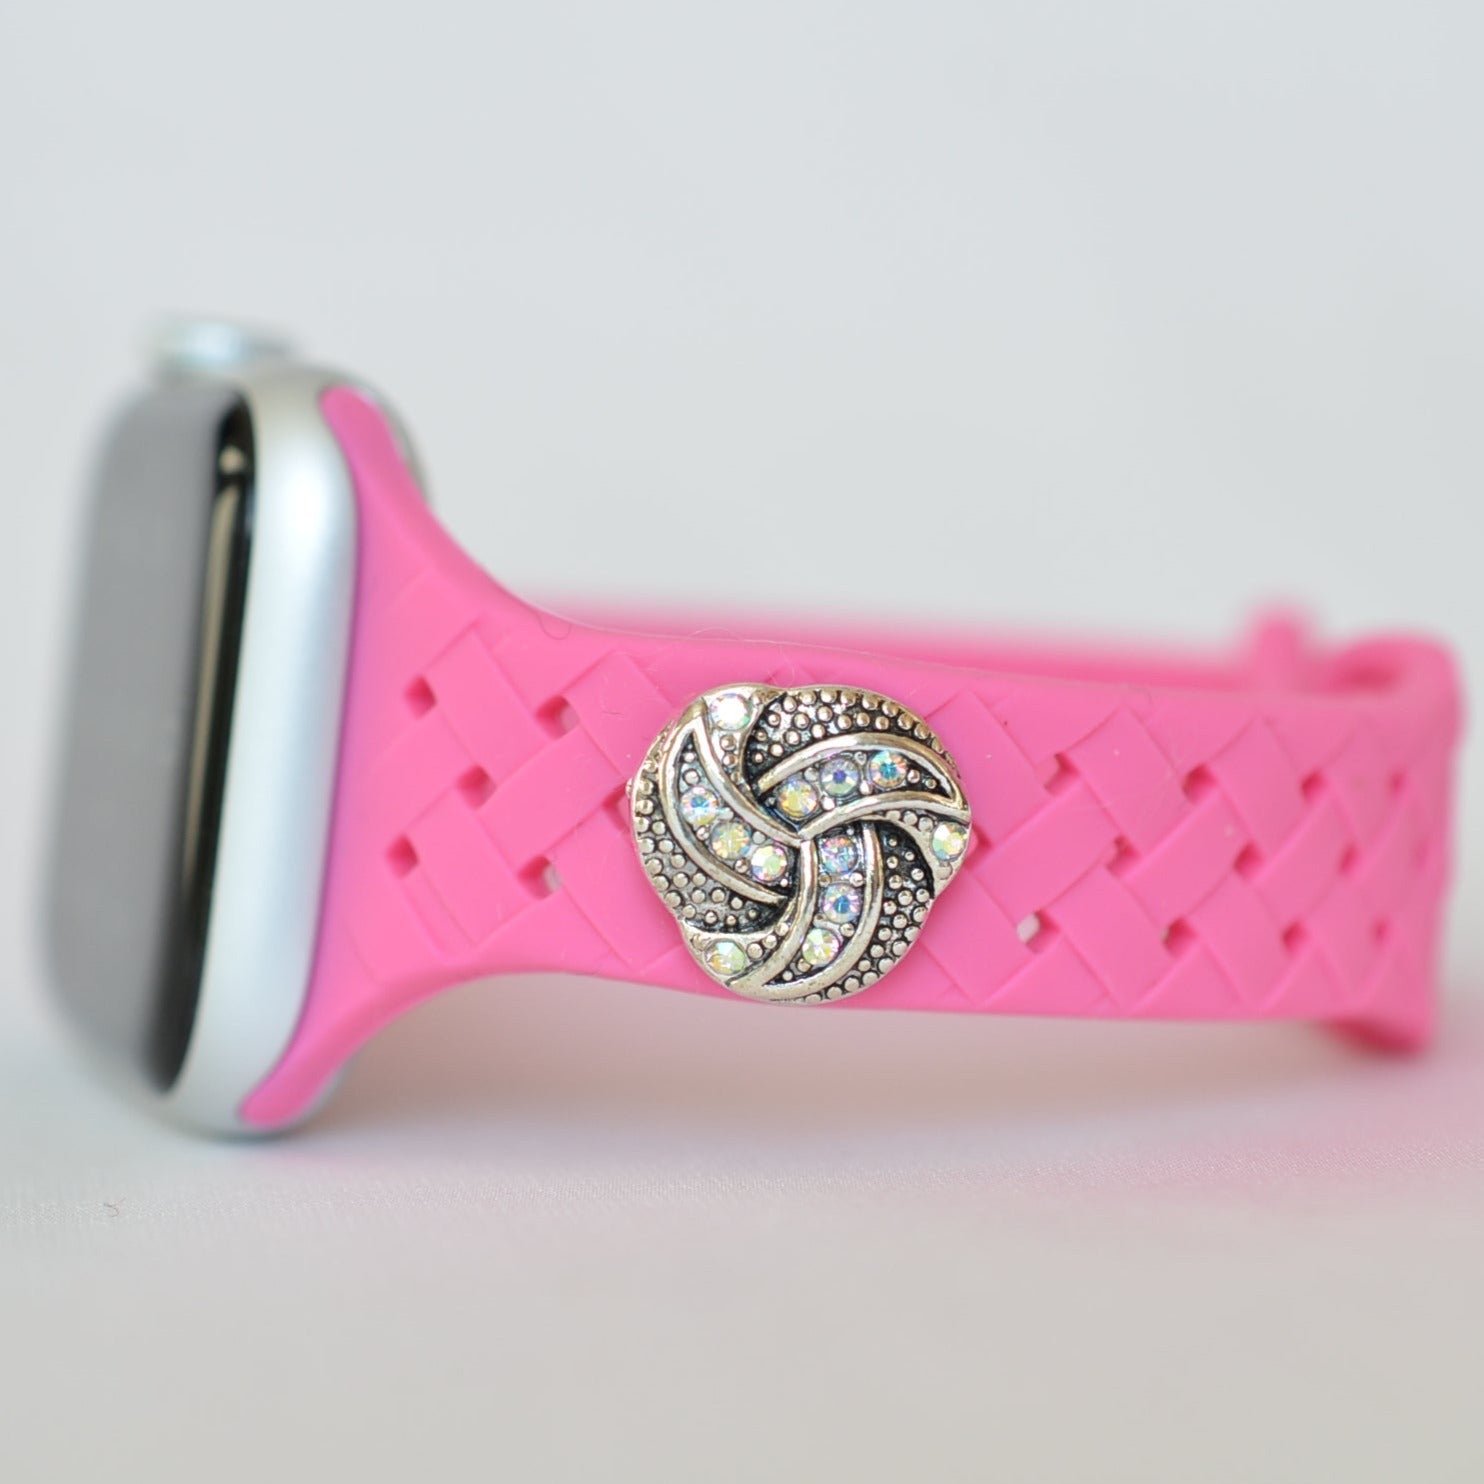 Hot Pink Apple Band with Charm